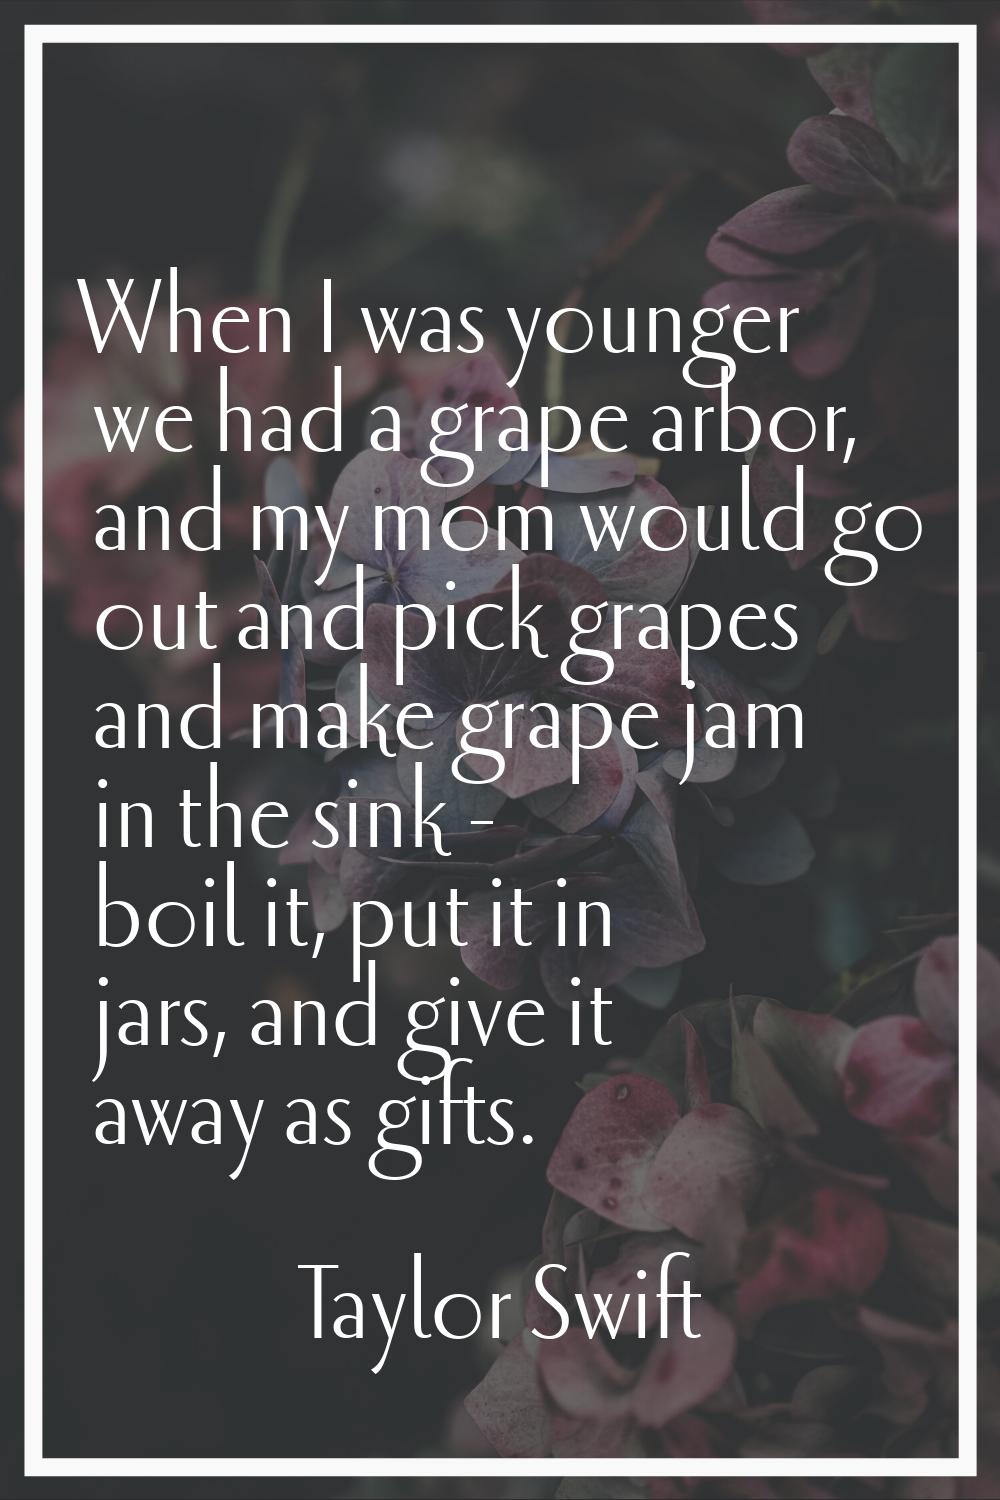 When I was younger we had a grape arbor, and my mom would go out and pick grapes and make grape jam